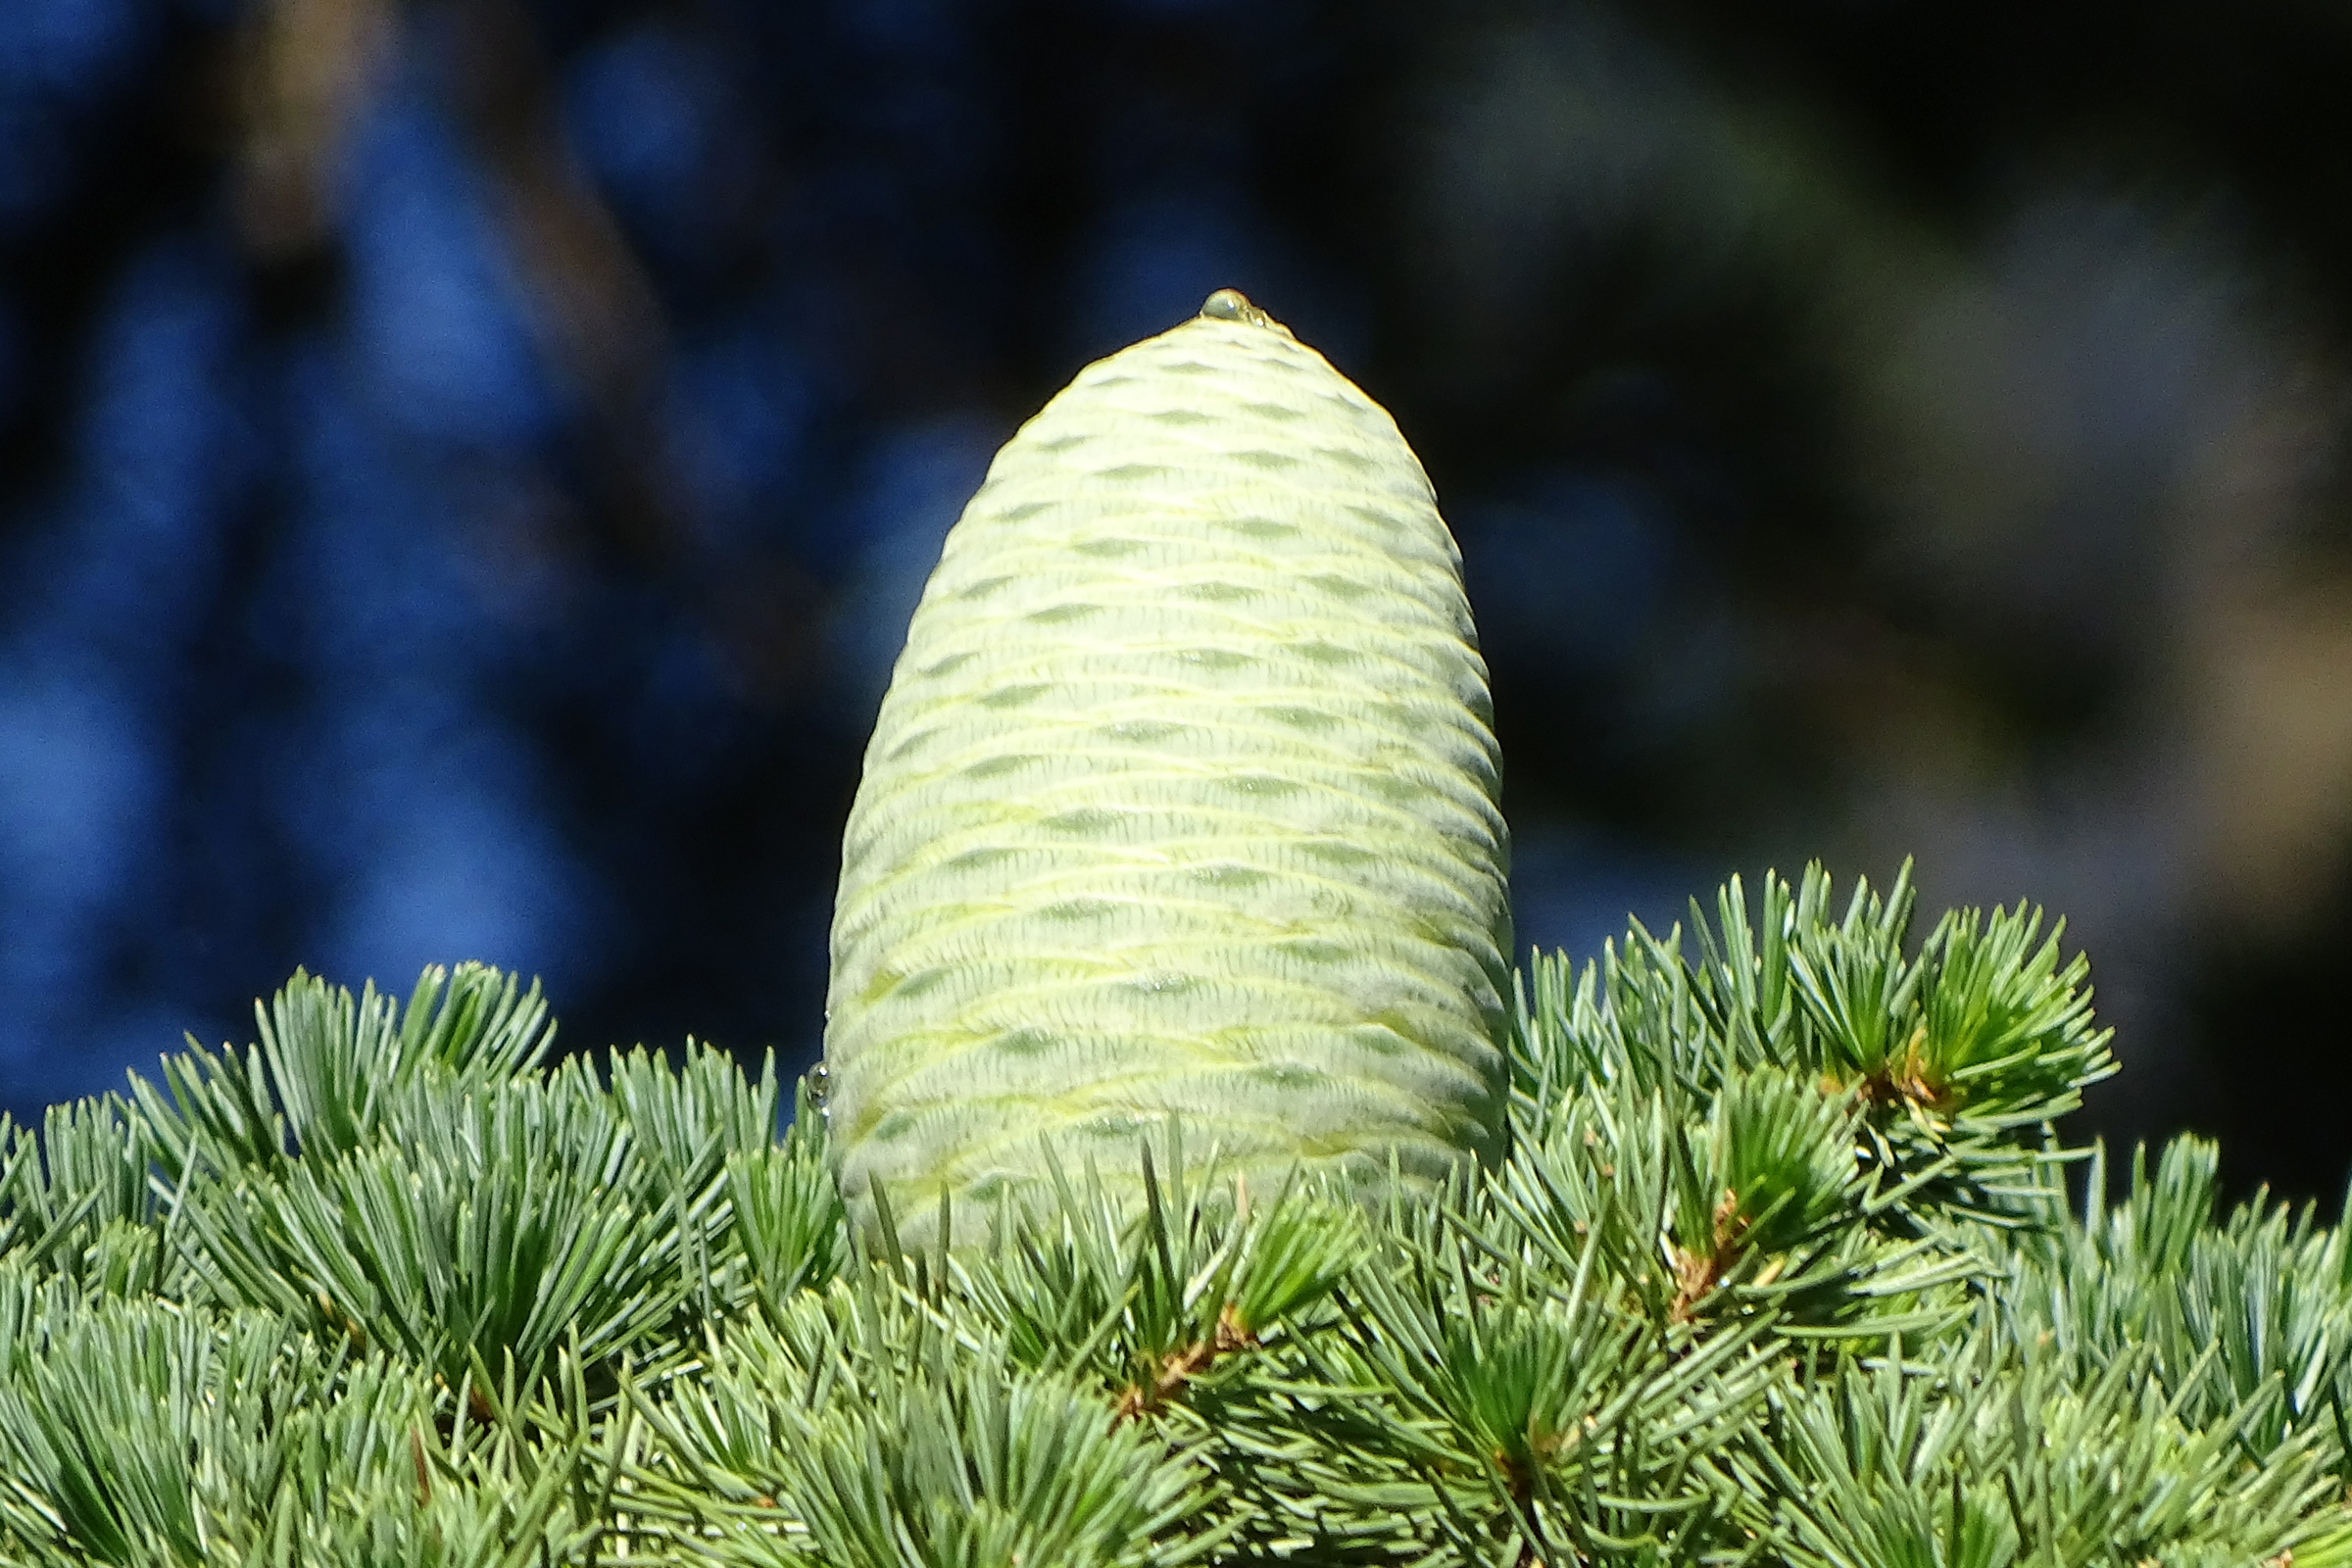 The cedar of Lebanon - a drought-tolerant tree species for dry sites